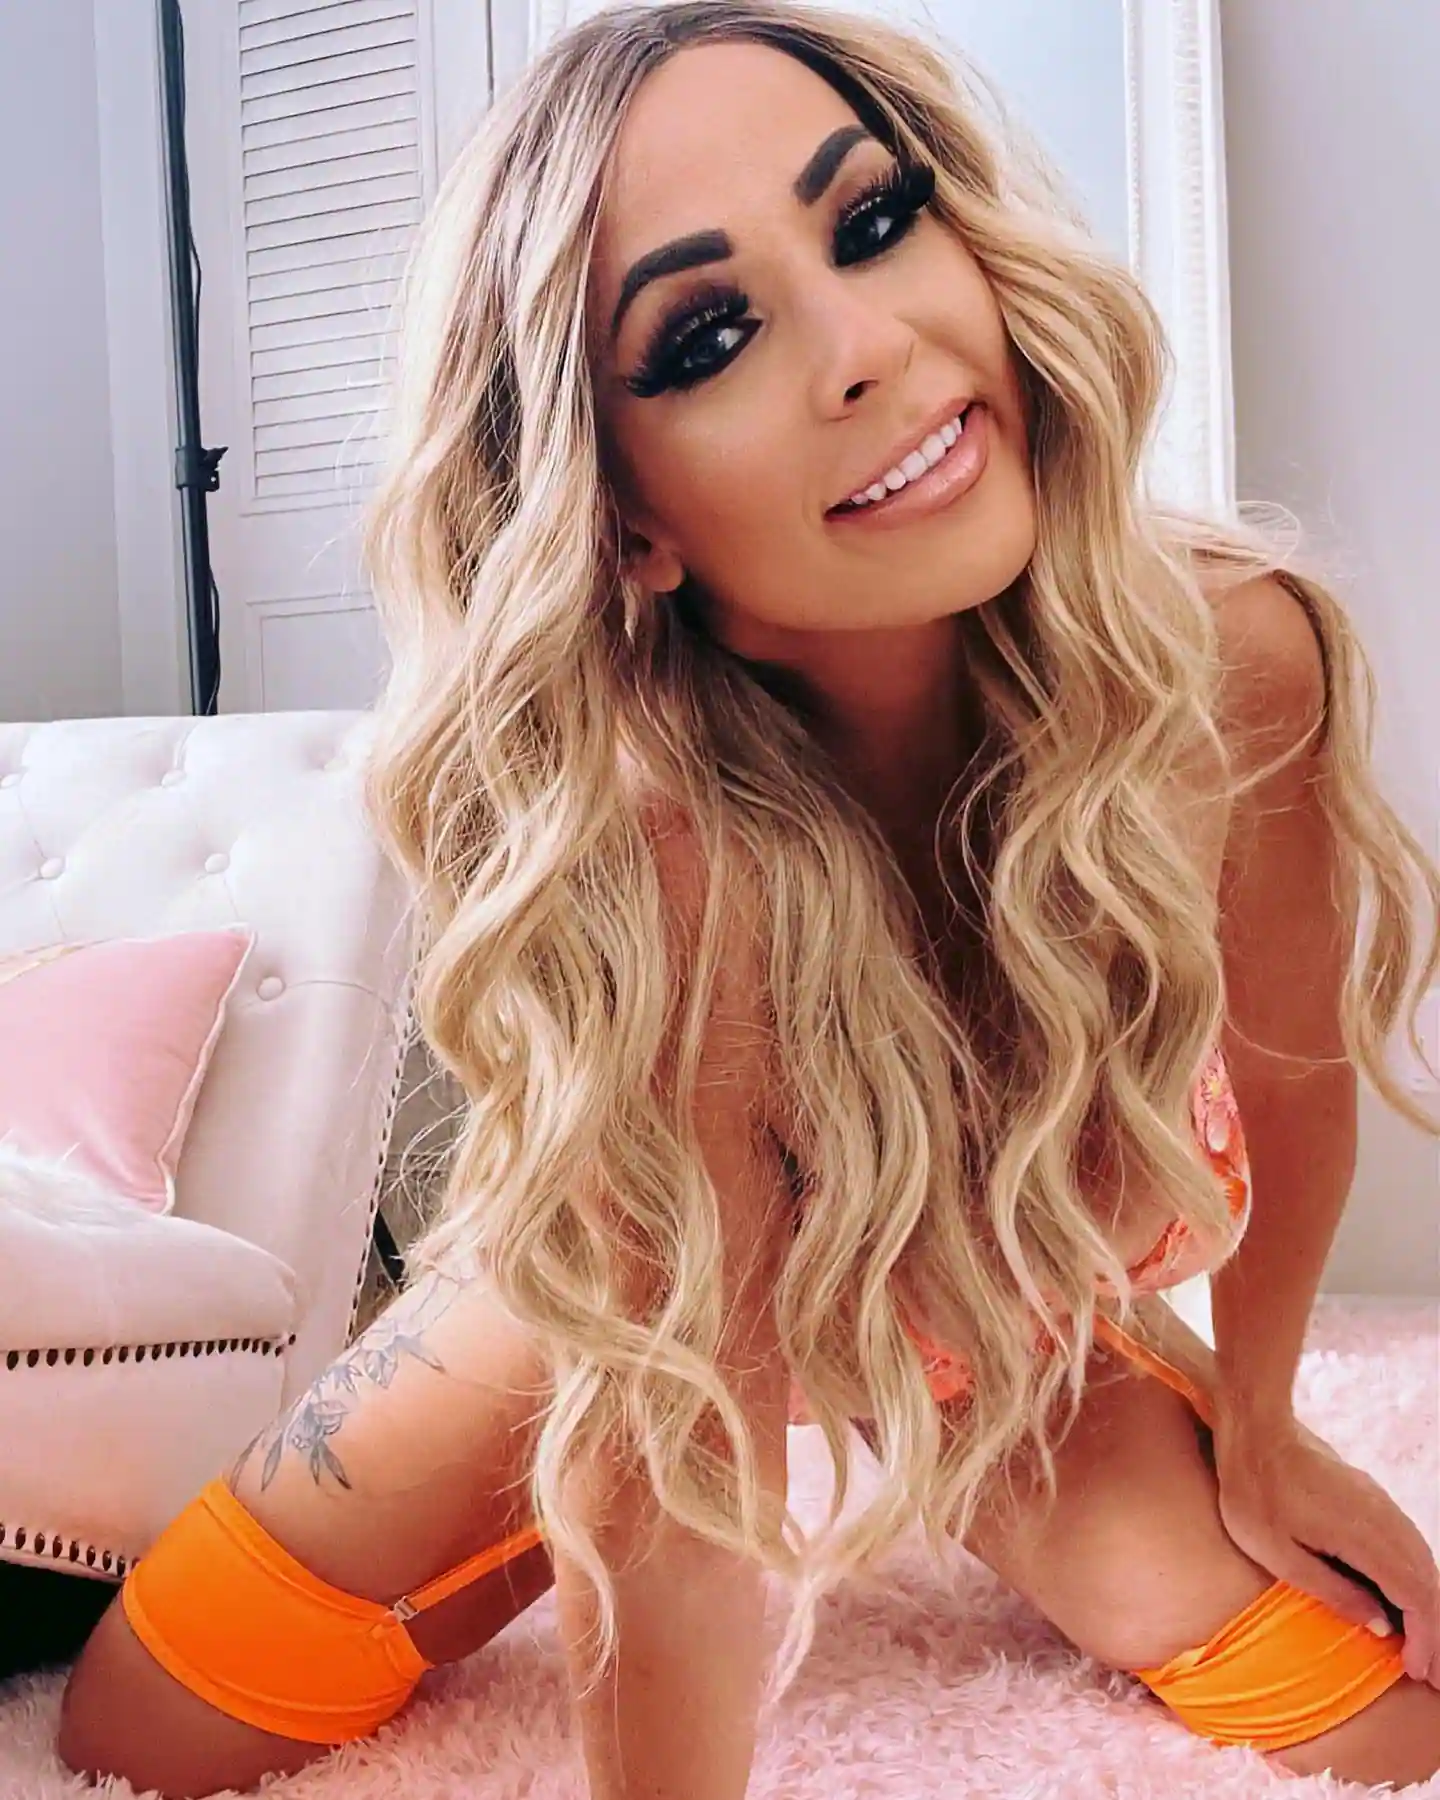 Sarah Juree had their photos and videos from OnlyFans become viral